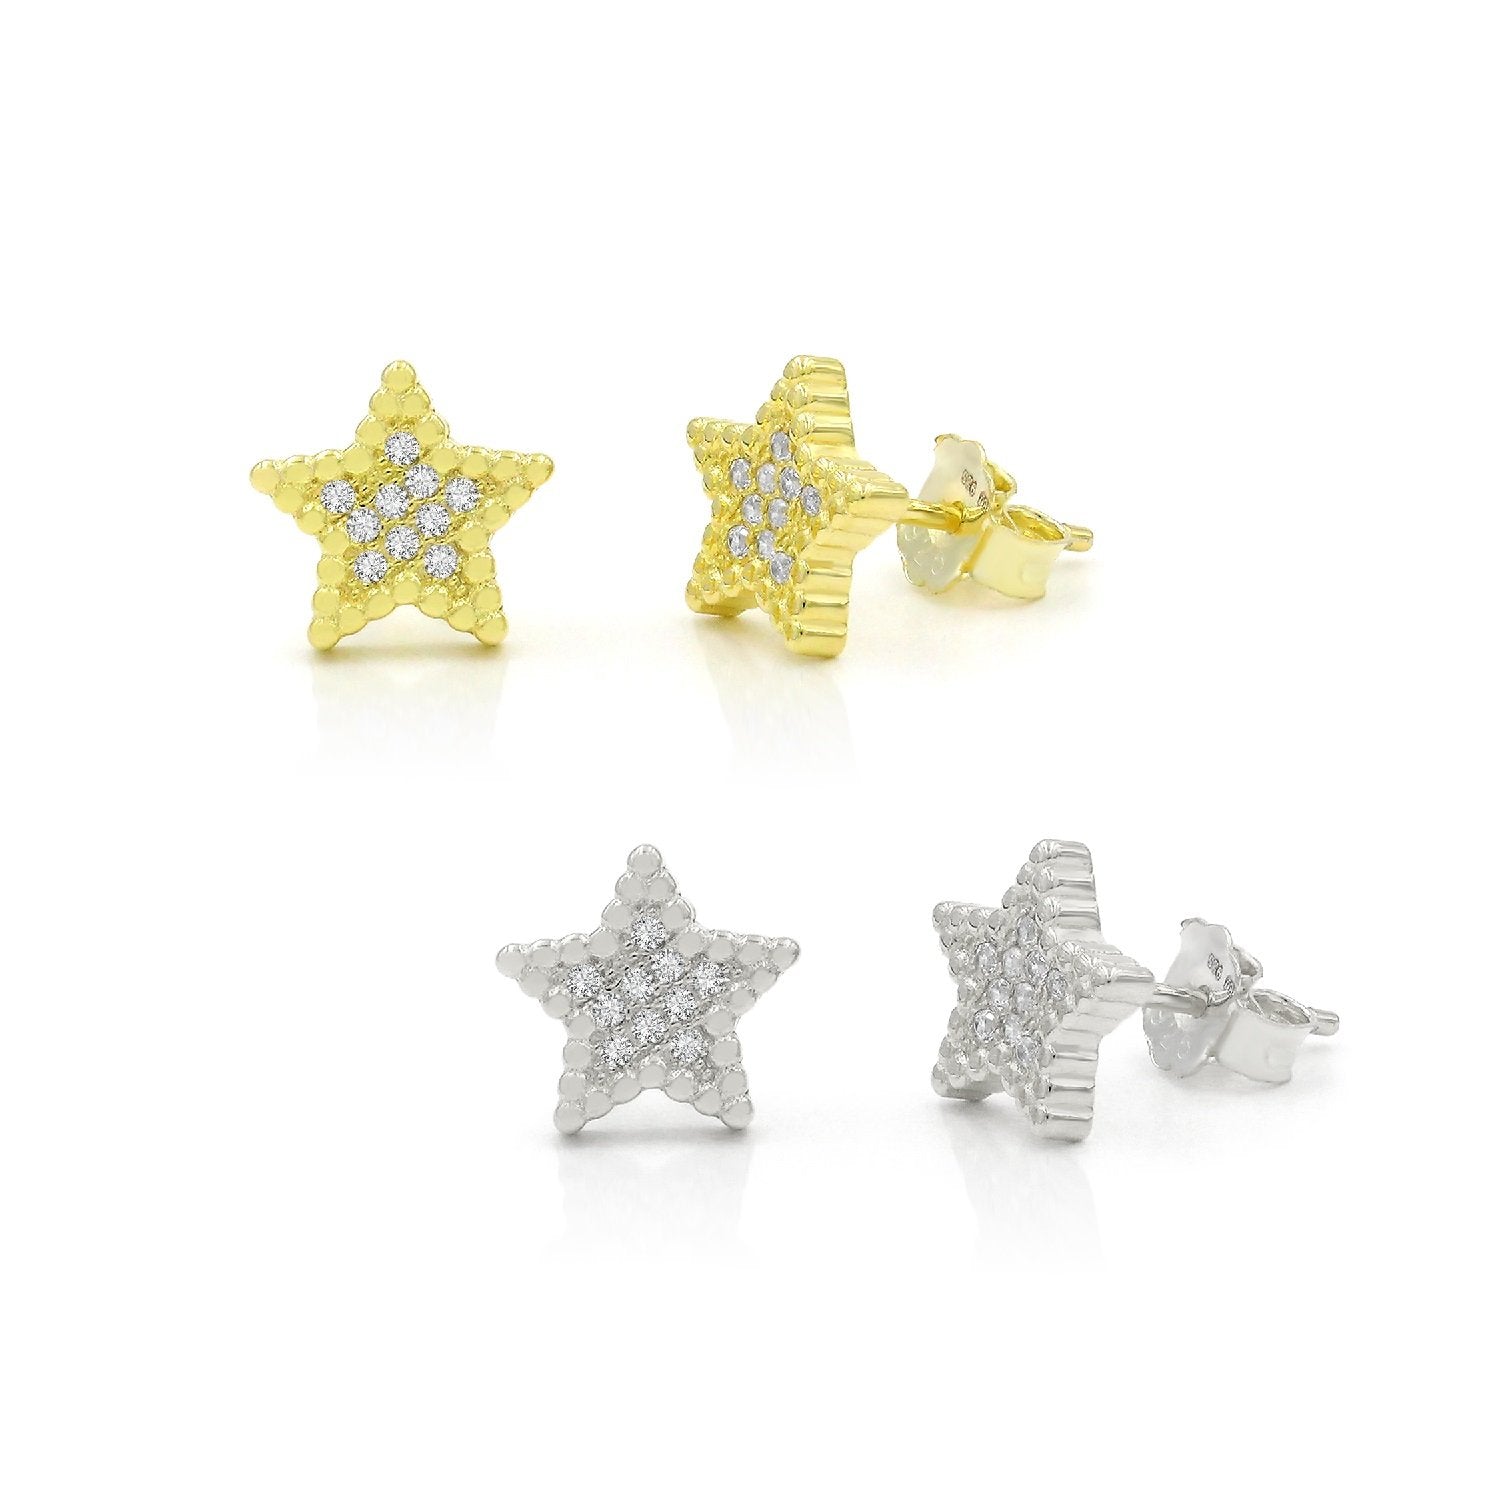 925 Sterling Silver Gold Plated Micro Pave Minimalist Star Stud Earrings